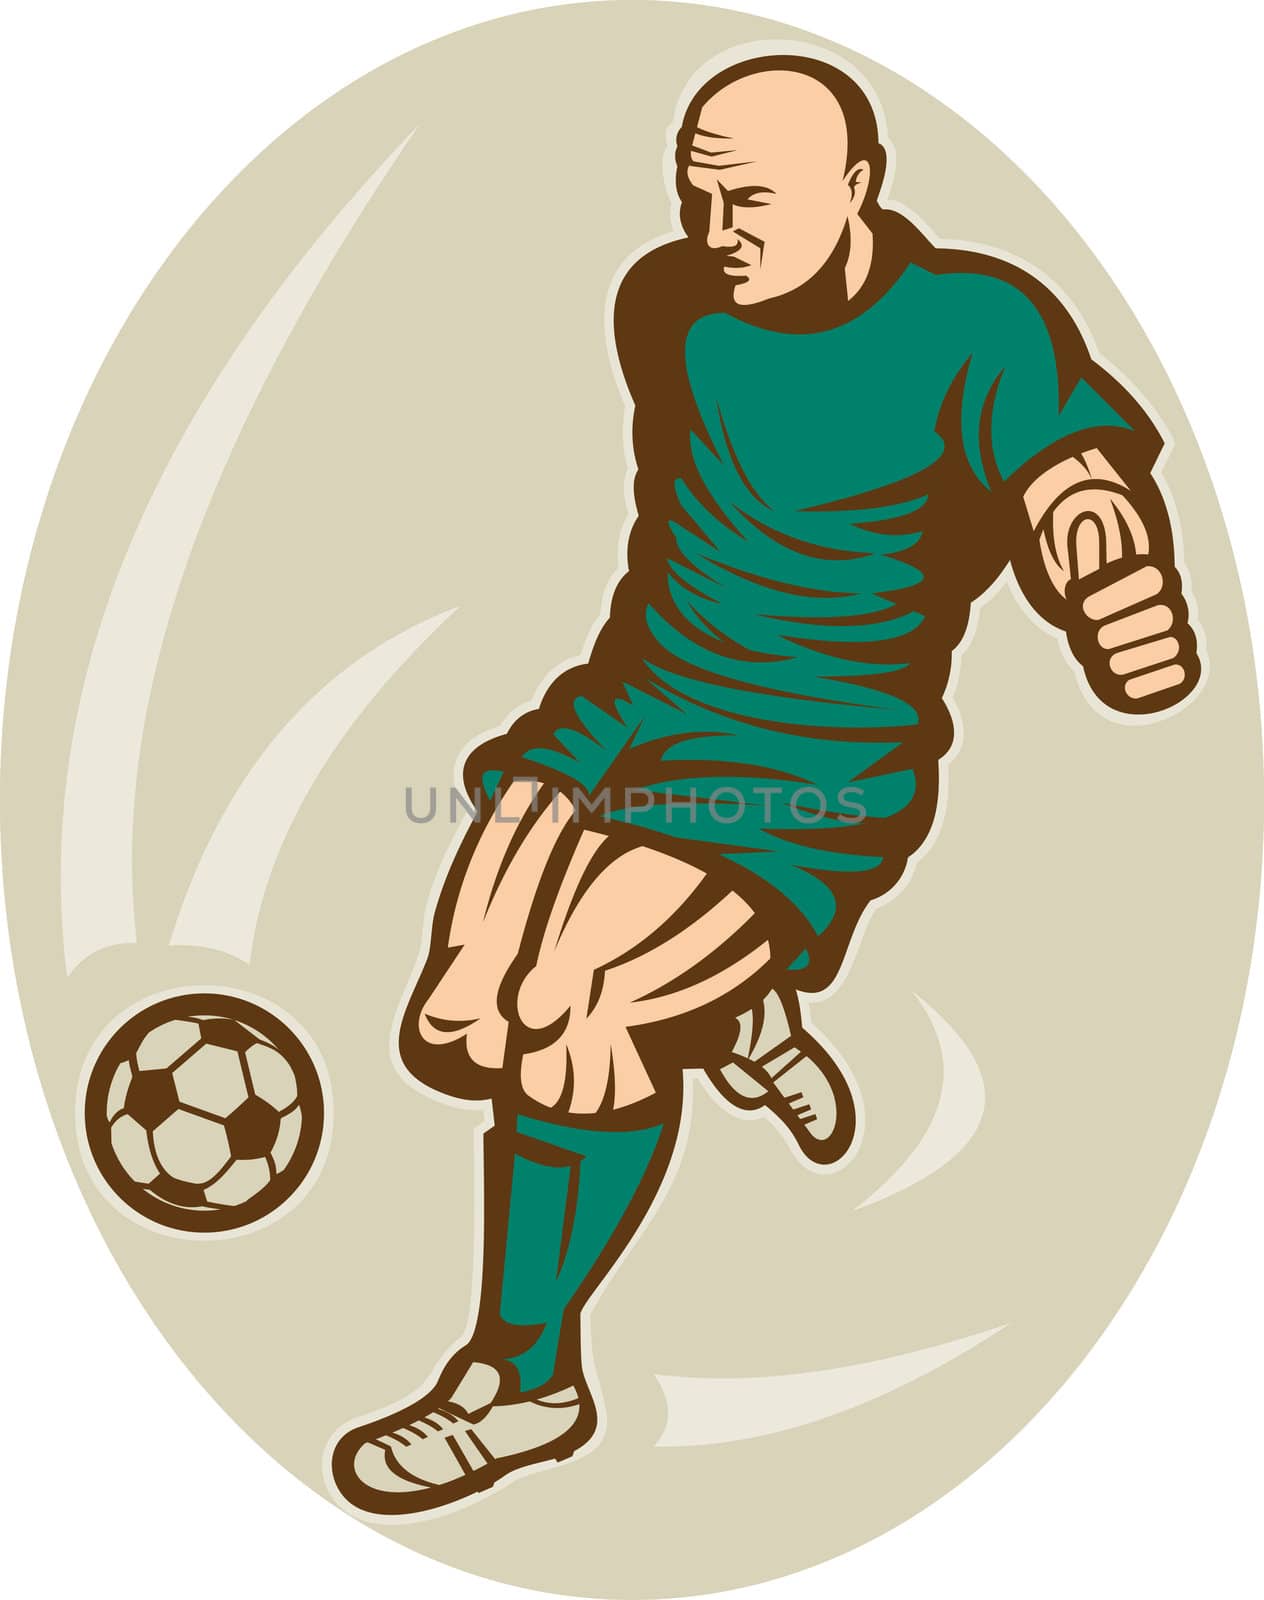 Soccer player running and kicking the ball by patrimonio